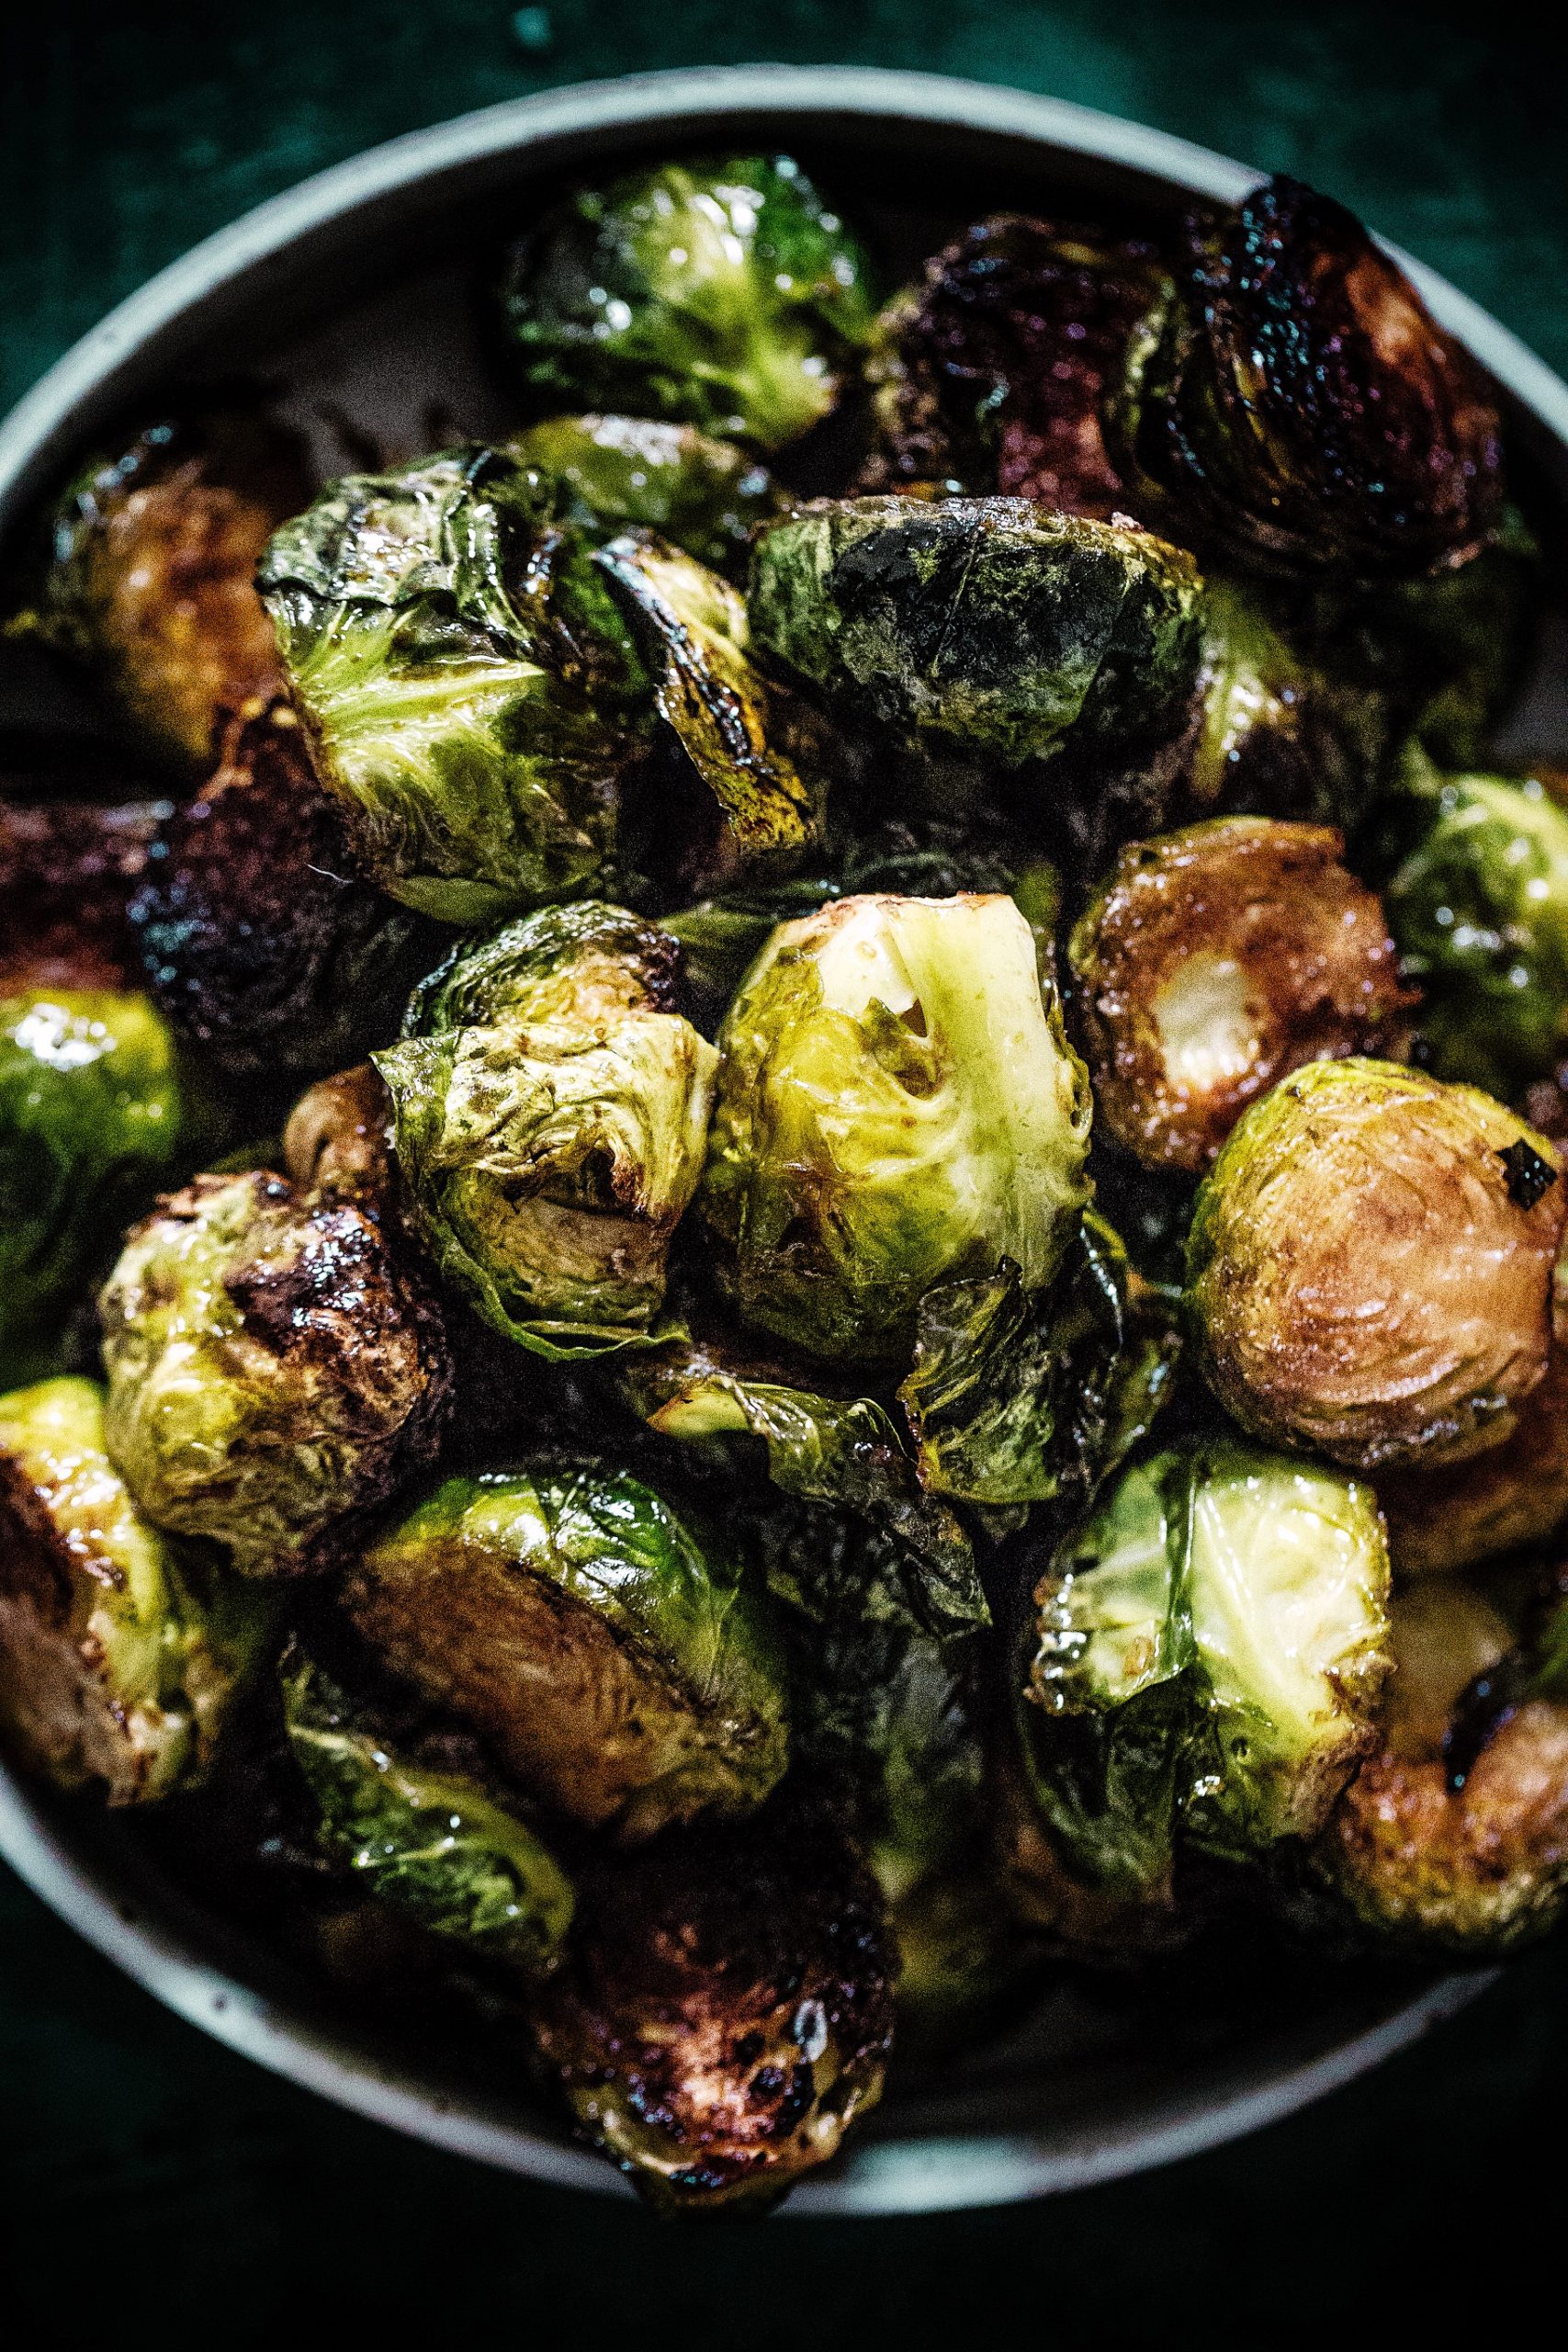 New! Killer Brussels Sprouts with Balsamic and Honey